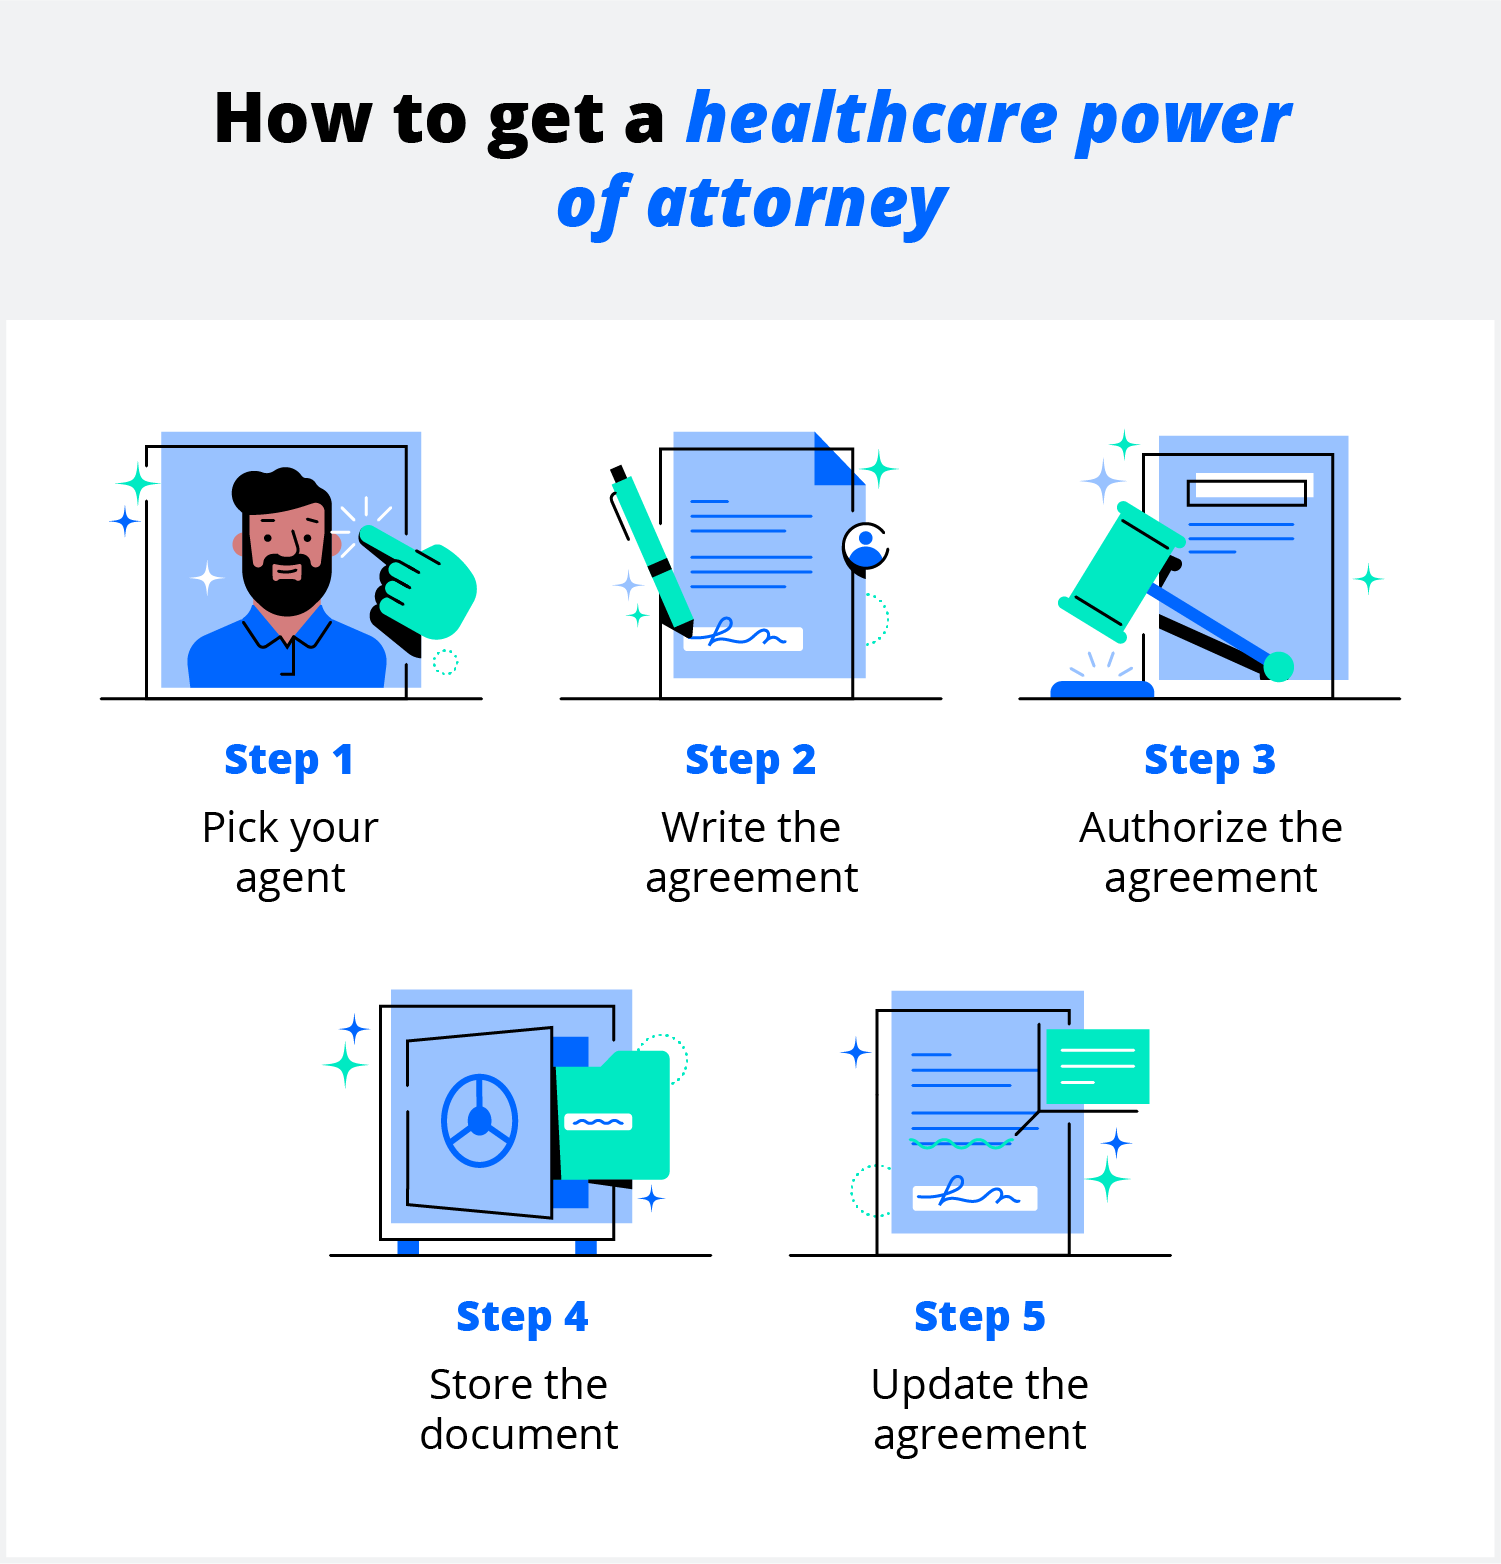 How to get healthcare power of attorney. Step 1: pick your agent. Step 2: write the agreement. Step 3: authorize the agreement. Step 4: store the document. Step 5: update the agreement.